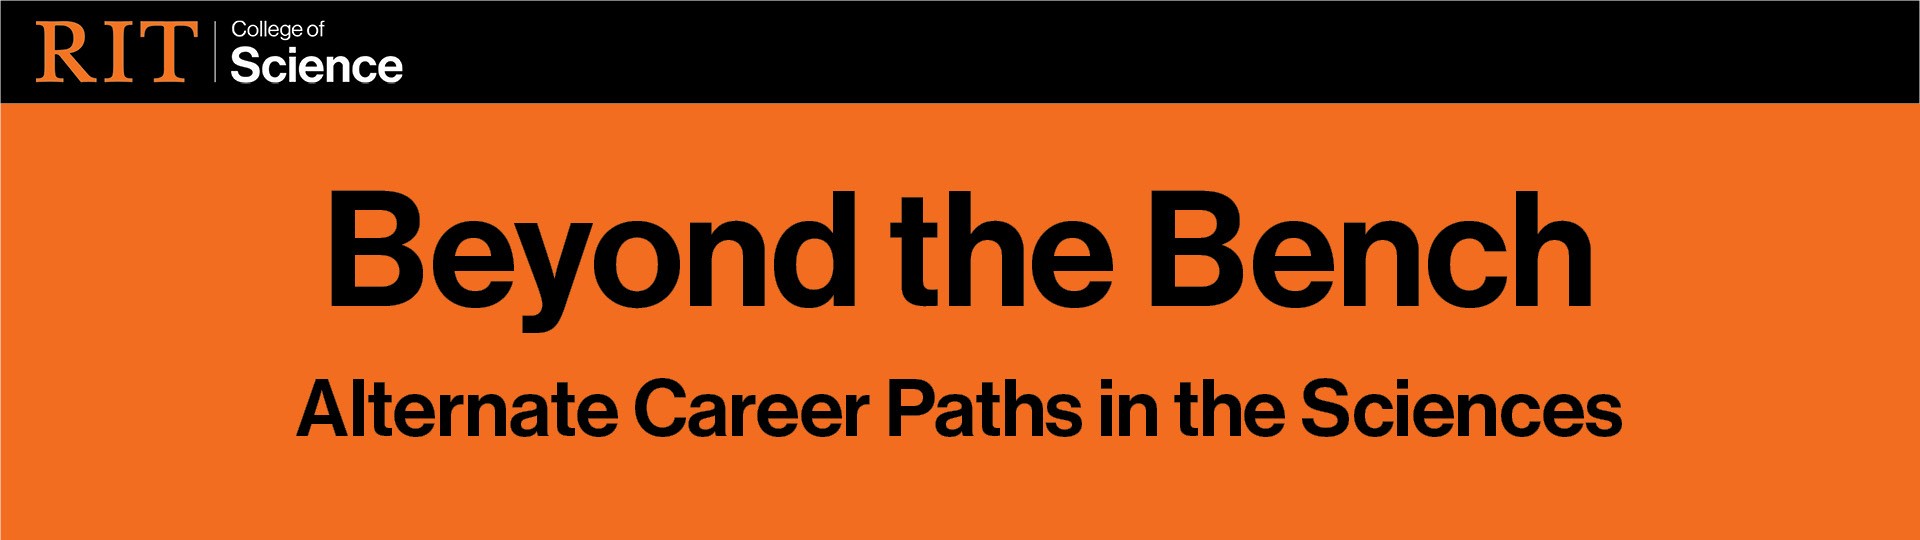 Beyond the Bench: Alternate Career Paths in the Sciences